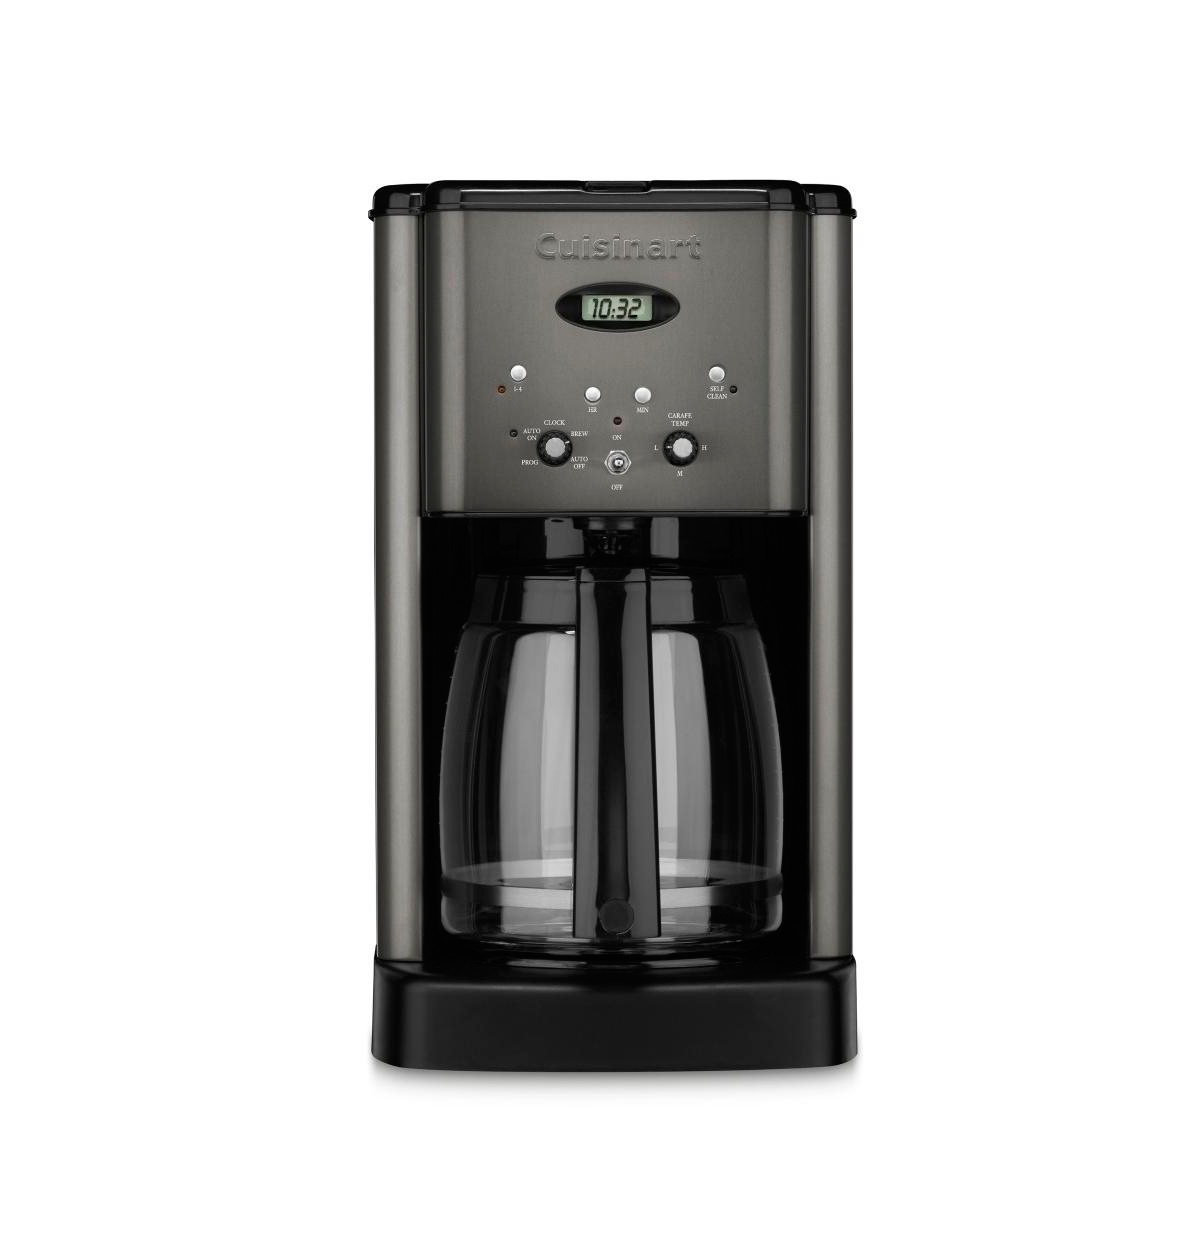 Cuisinart Dcc-1200 Programmable Brew Central 12-cup Coffee Maker In Black Stainless Steel